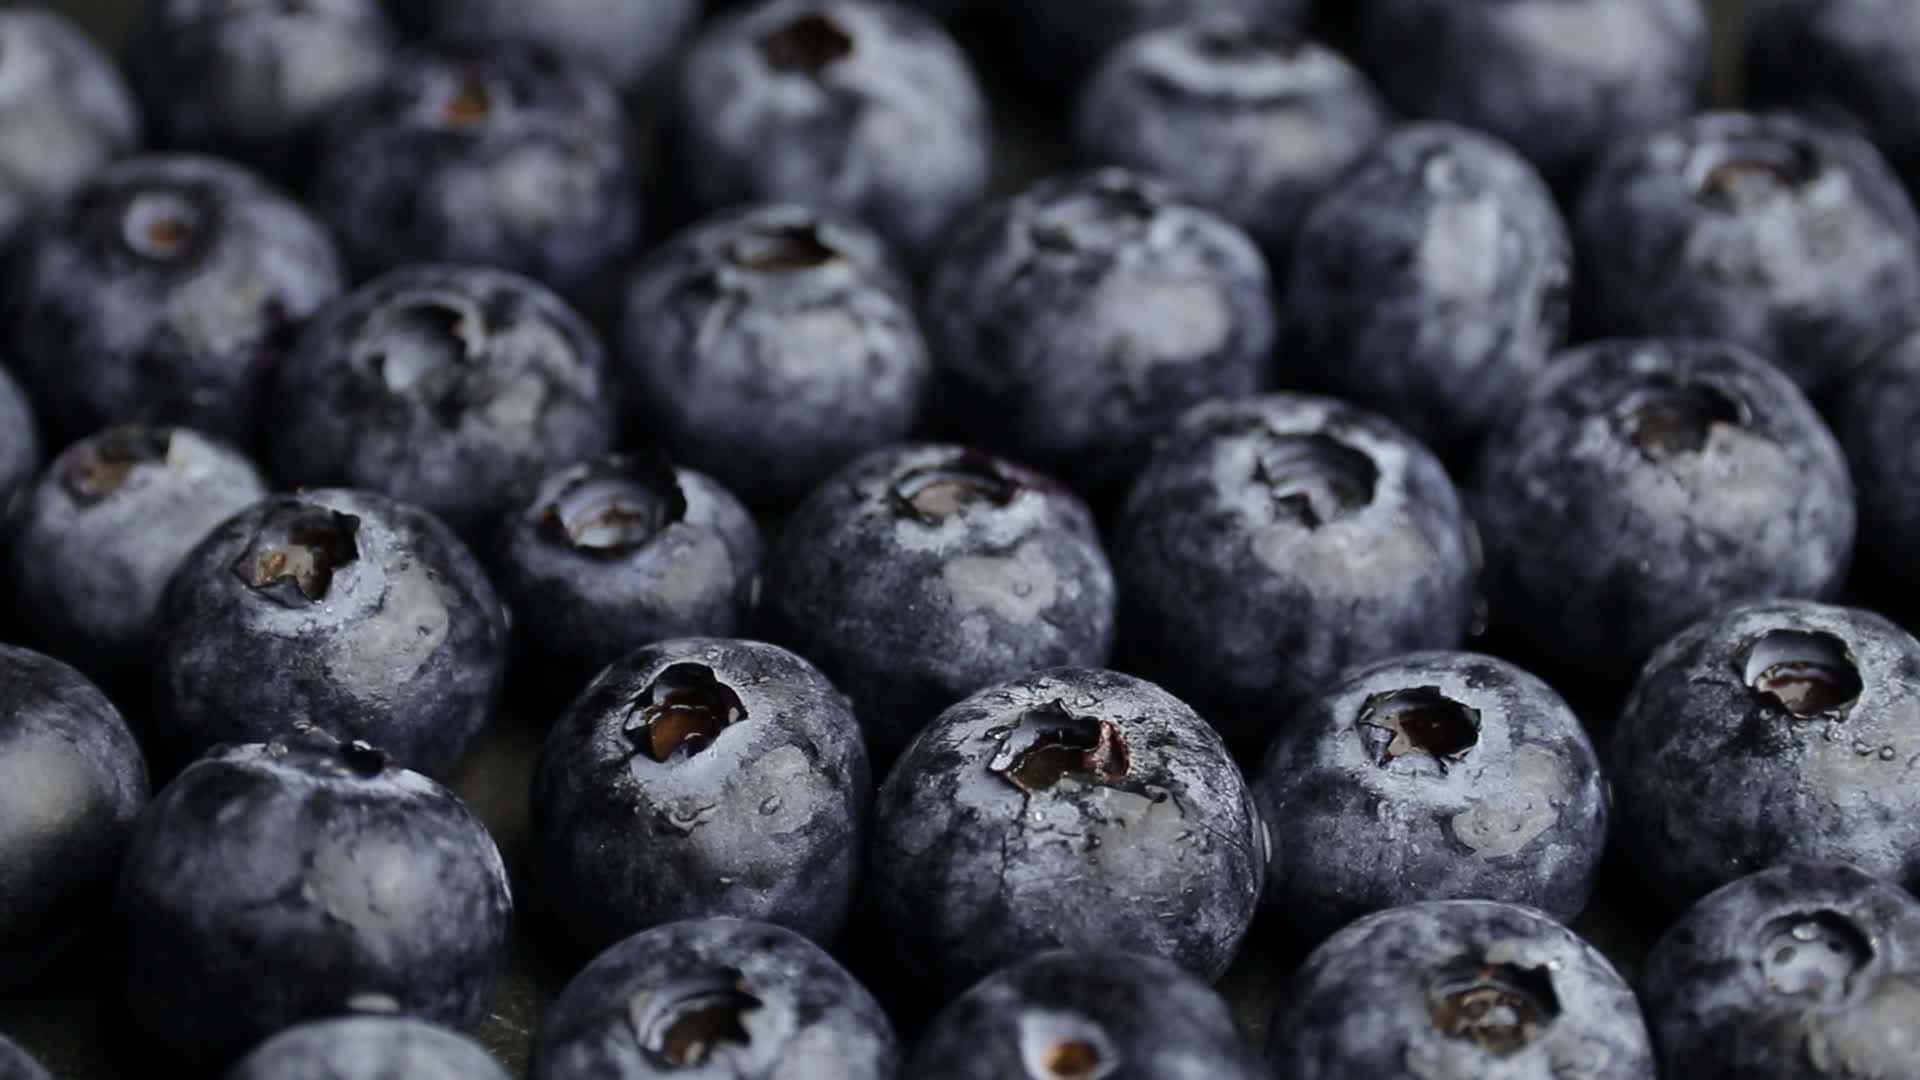 Image  A Basket of Fresh Blueberries